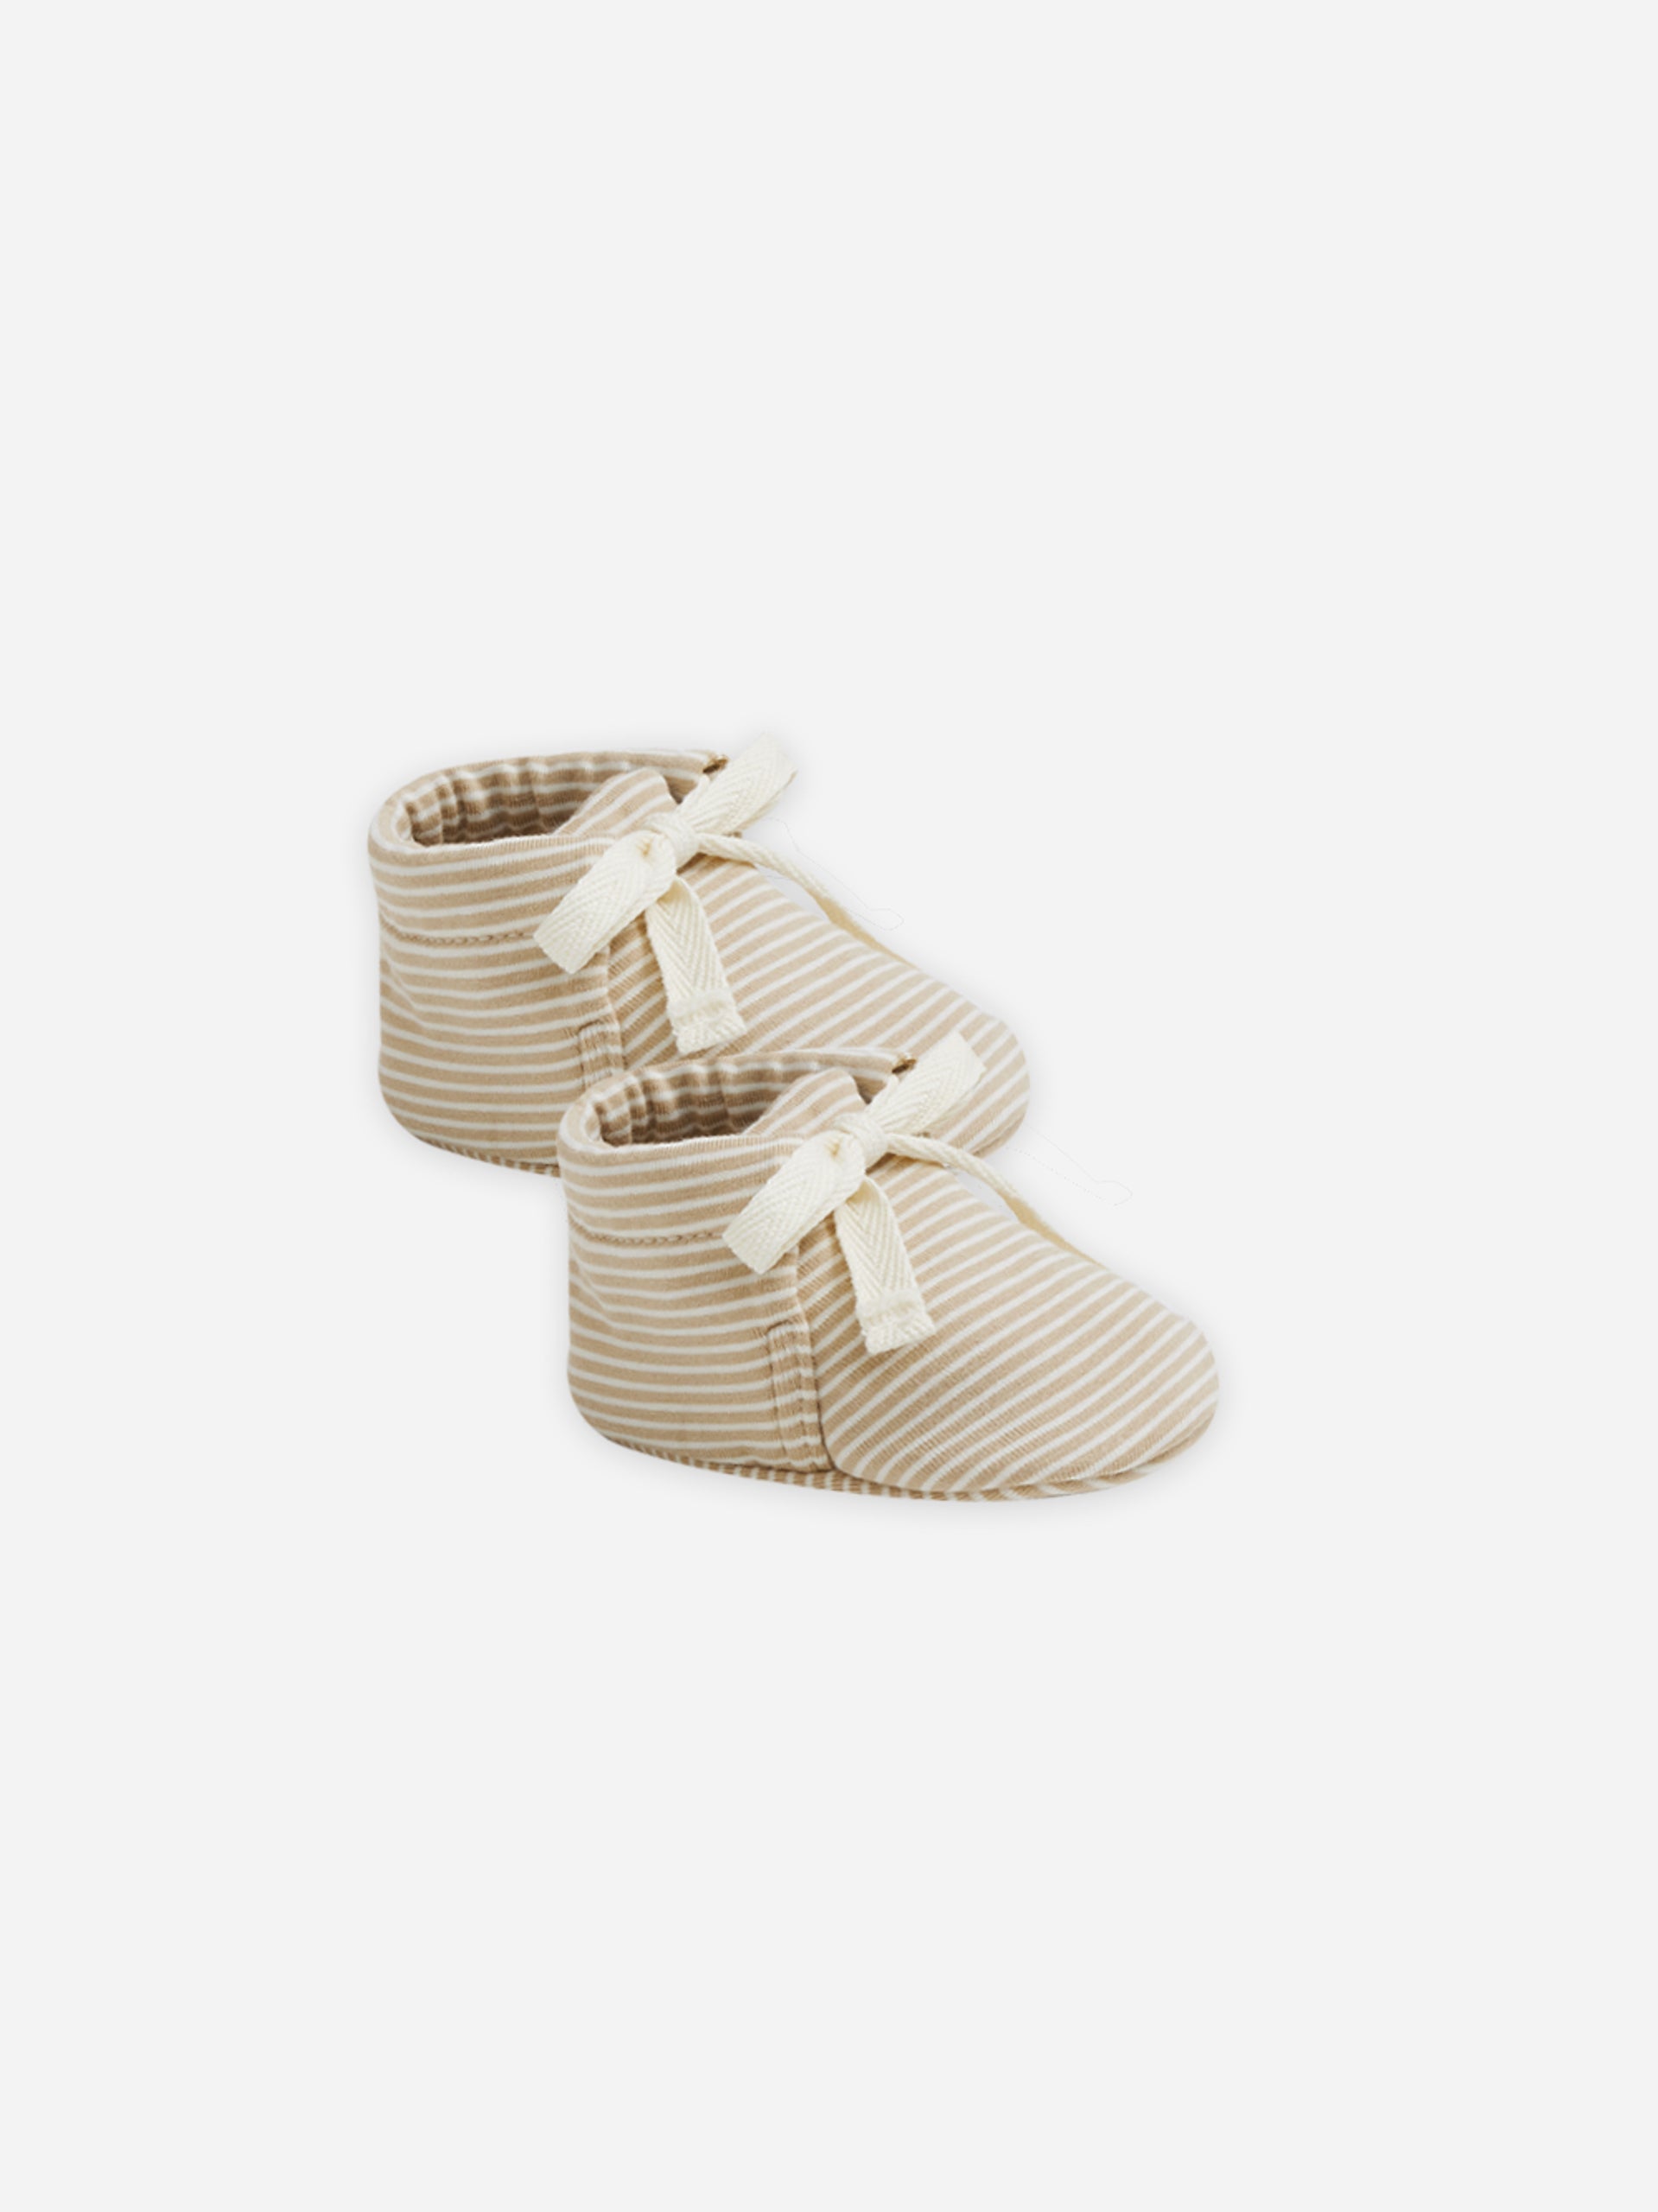 Baby Booties || Latte Micro Stripe - Rylee + Cru | Kids Clothes | Trendy Baby Clothes | Modern Infant Outfits |